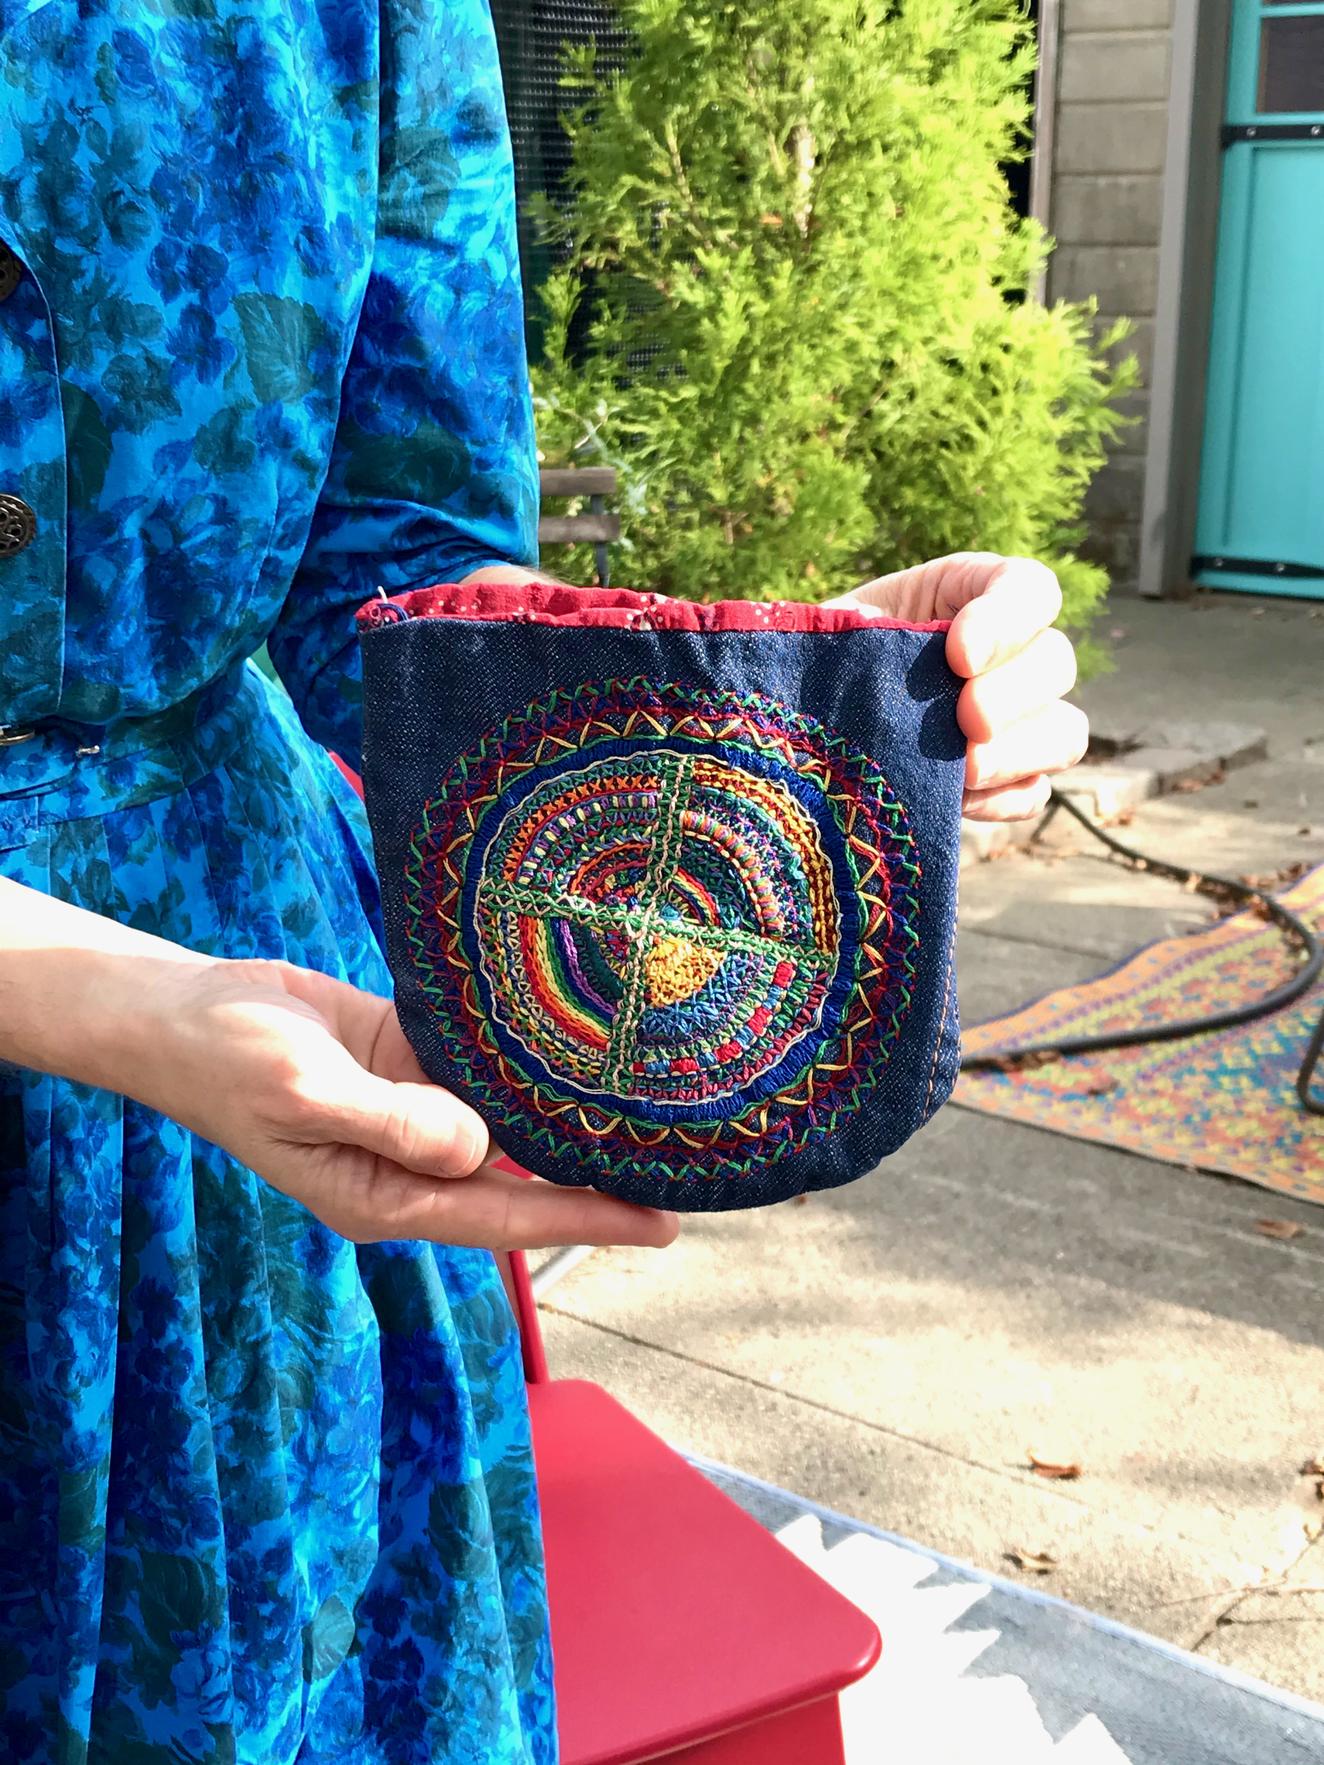 Color photograph, a close-up of a small denim purse with rainbow embroidery in a radial pattern. The photograph is outside, and the purse is held by a white woman in a blue floral dress. We only see her hands and torso.